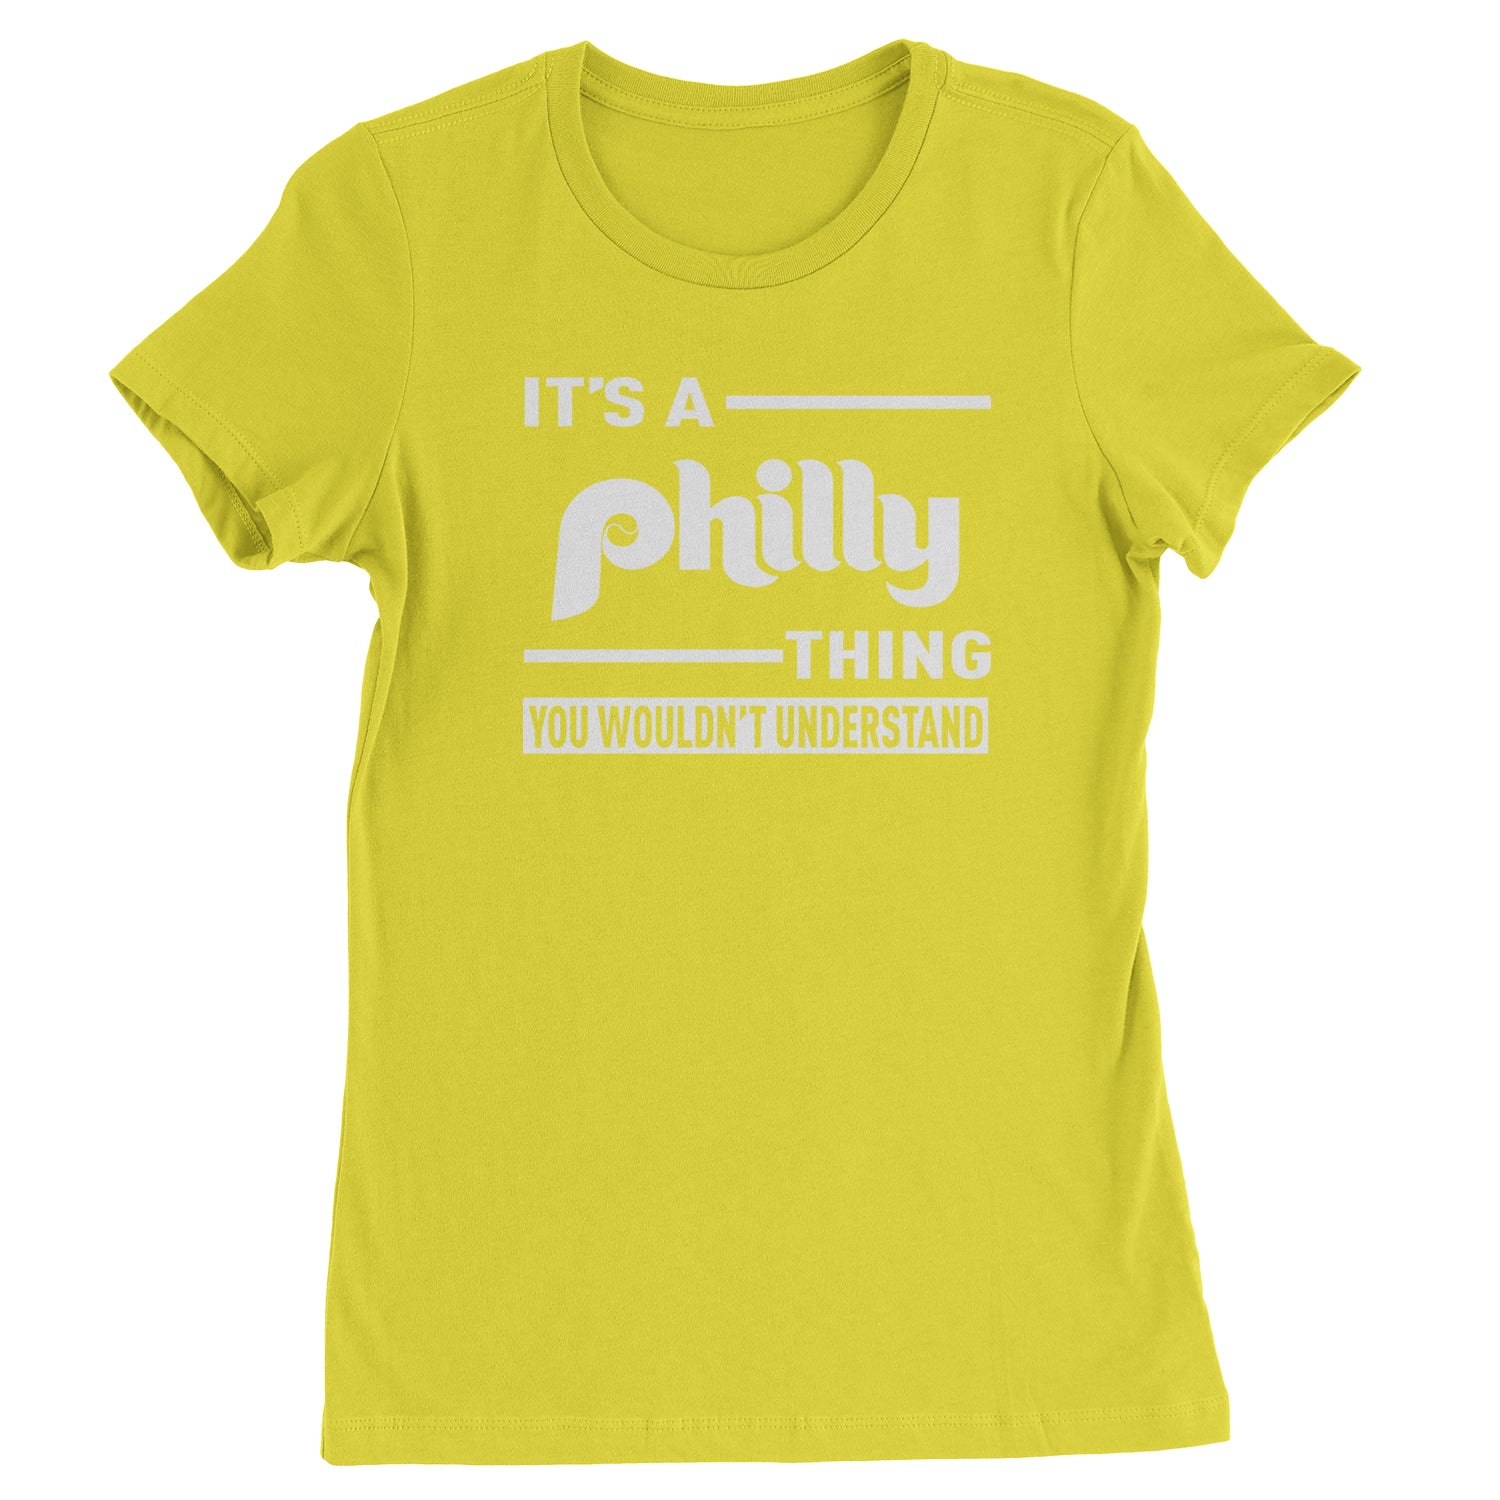 It's A Philly Thing, You Wouldn't Understand Womens T-shirt baseball, filly, football, jawn, morgan, Philadelphia, philli by Expression Tees